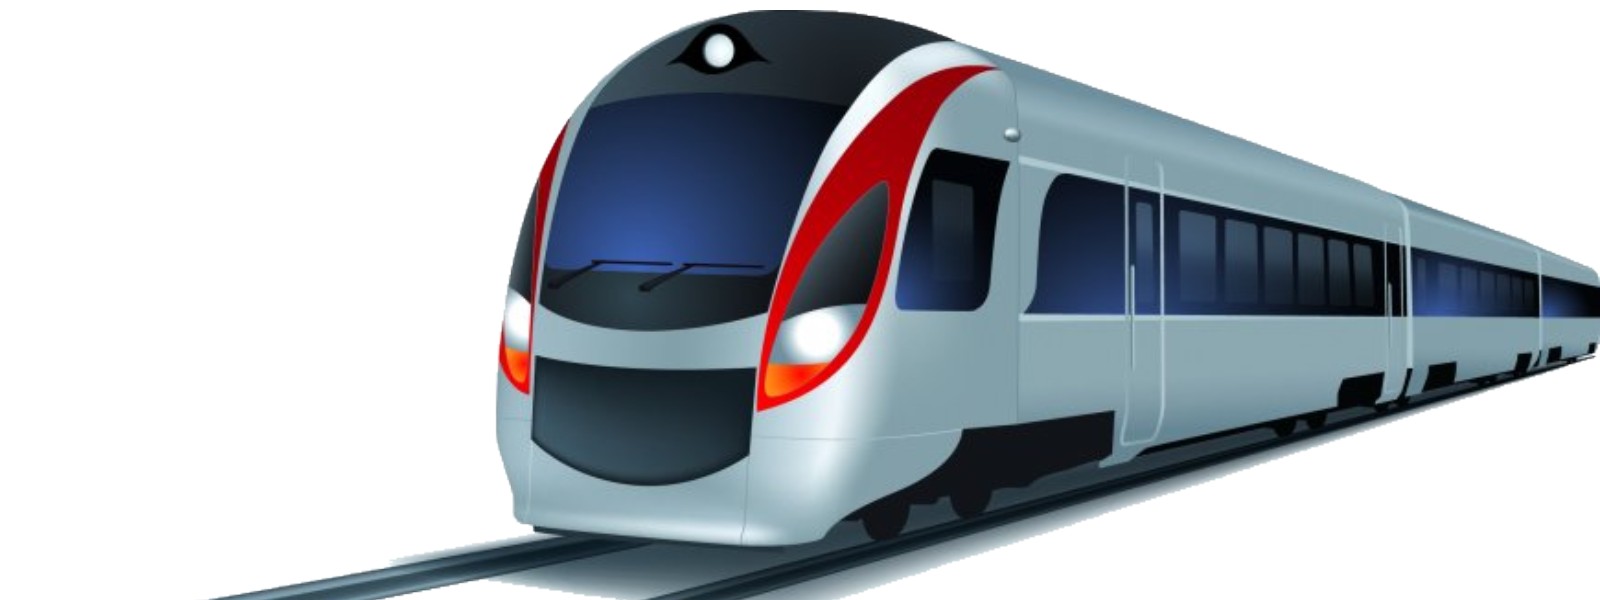 Sri Lanka to pay Rs. 5 Bn for scrapped LRT project